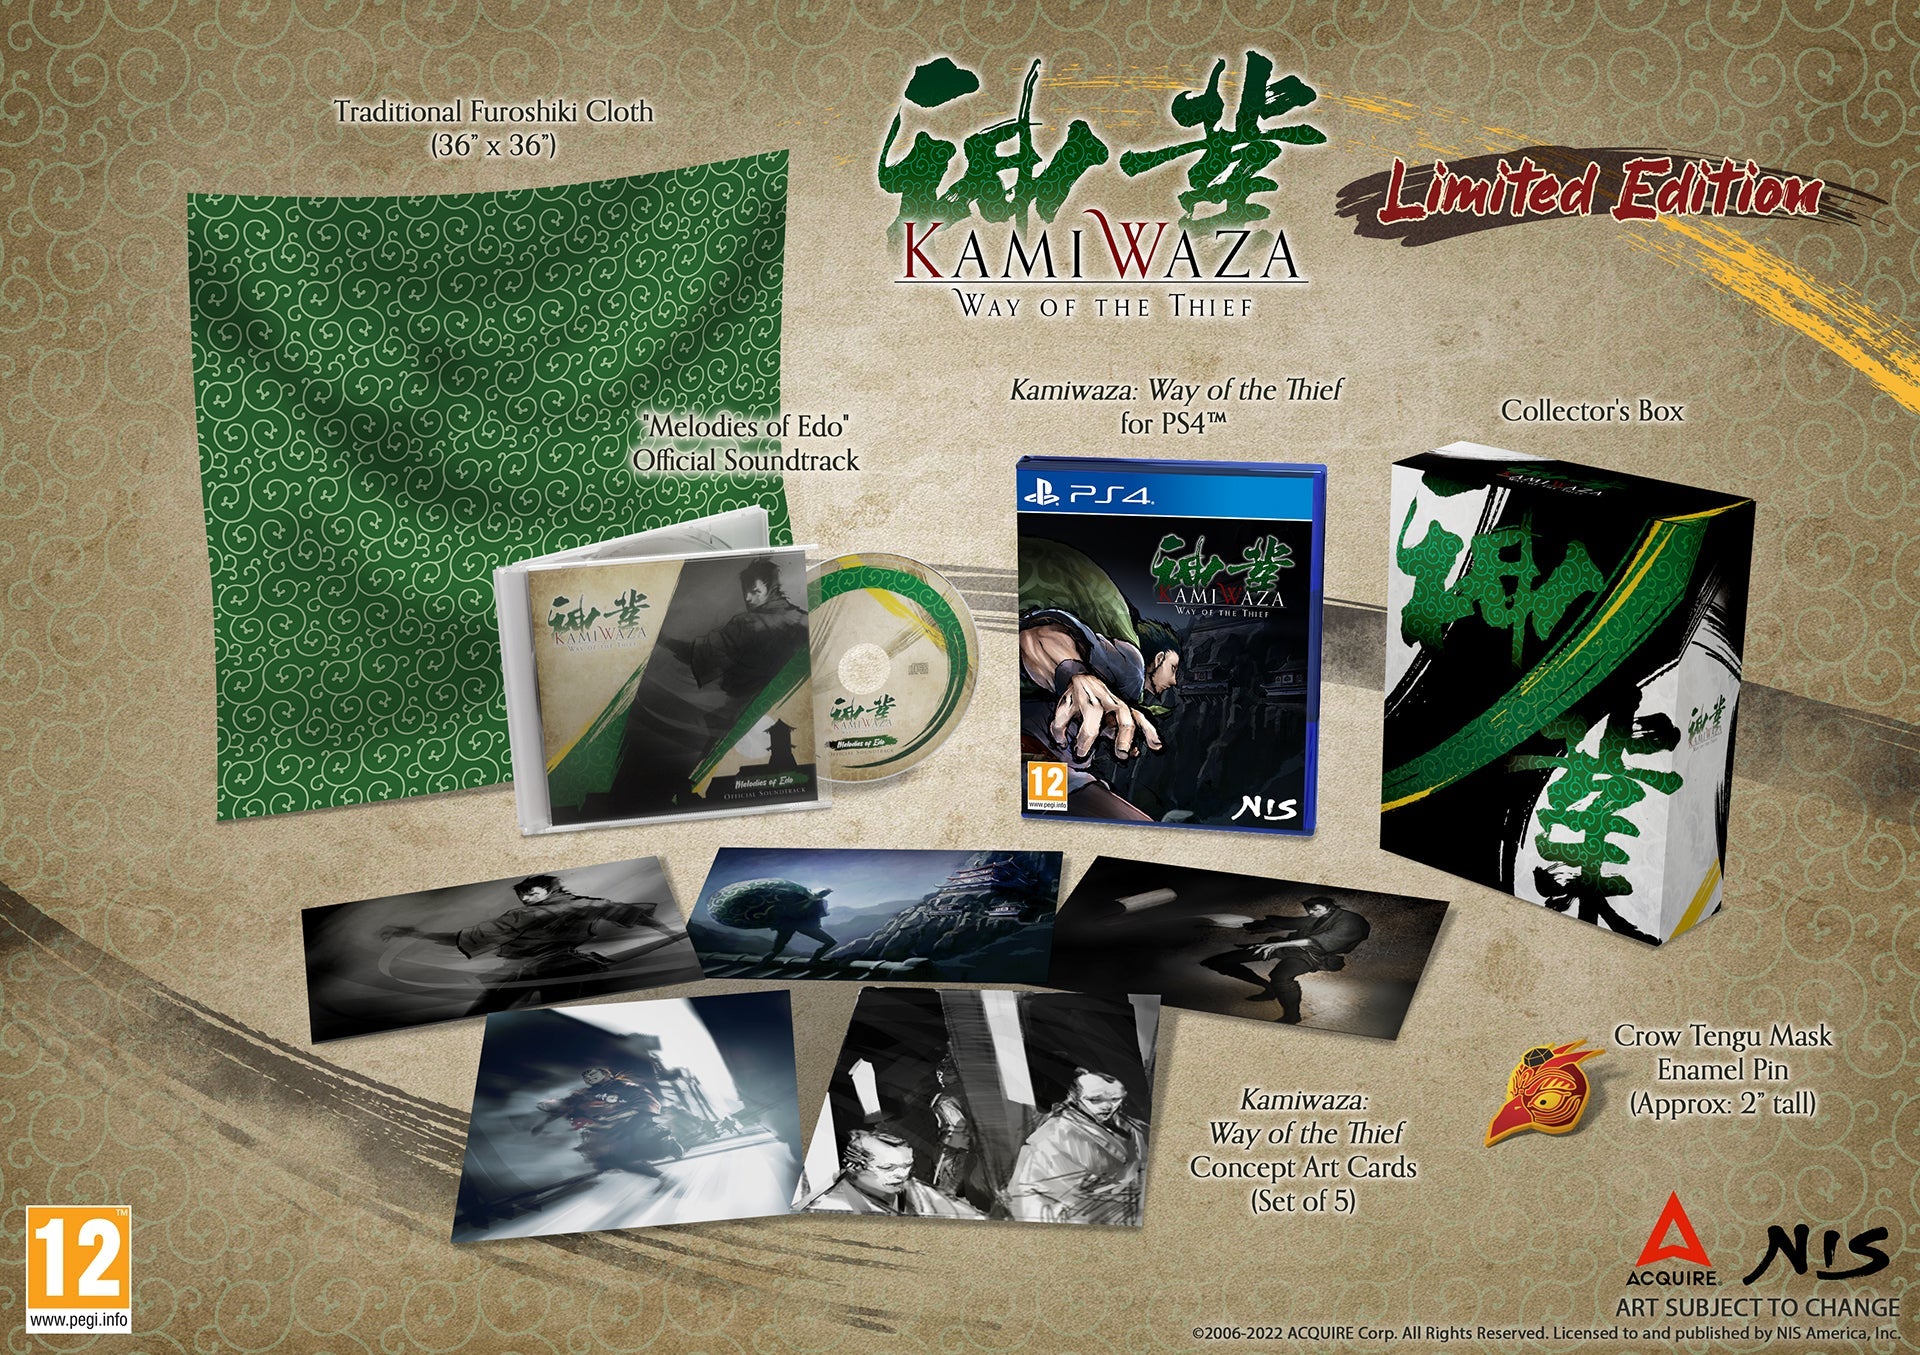 Kamiwaza: Way of the Thief  - Limited Edition - PS4®